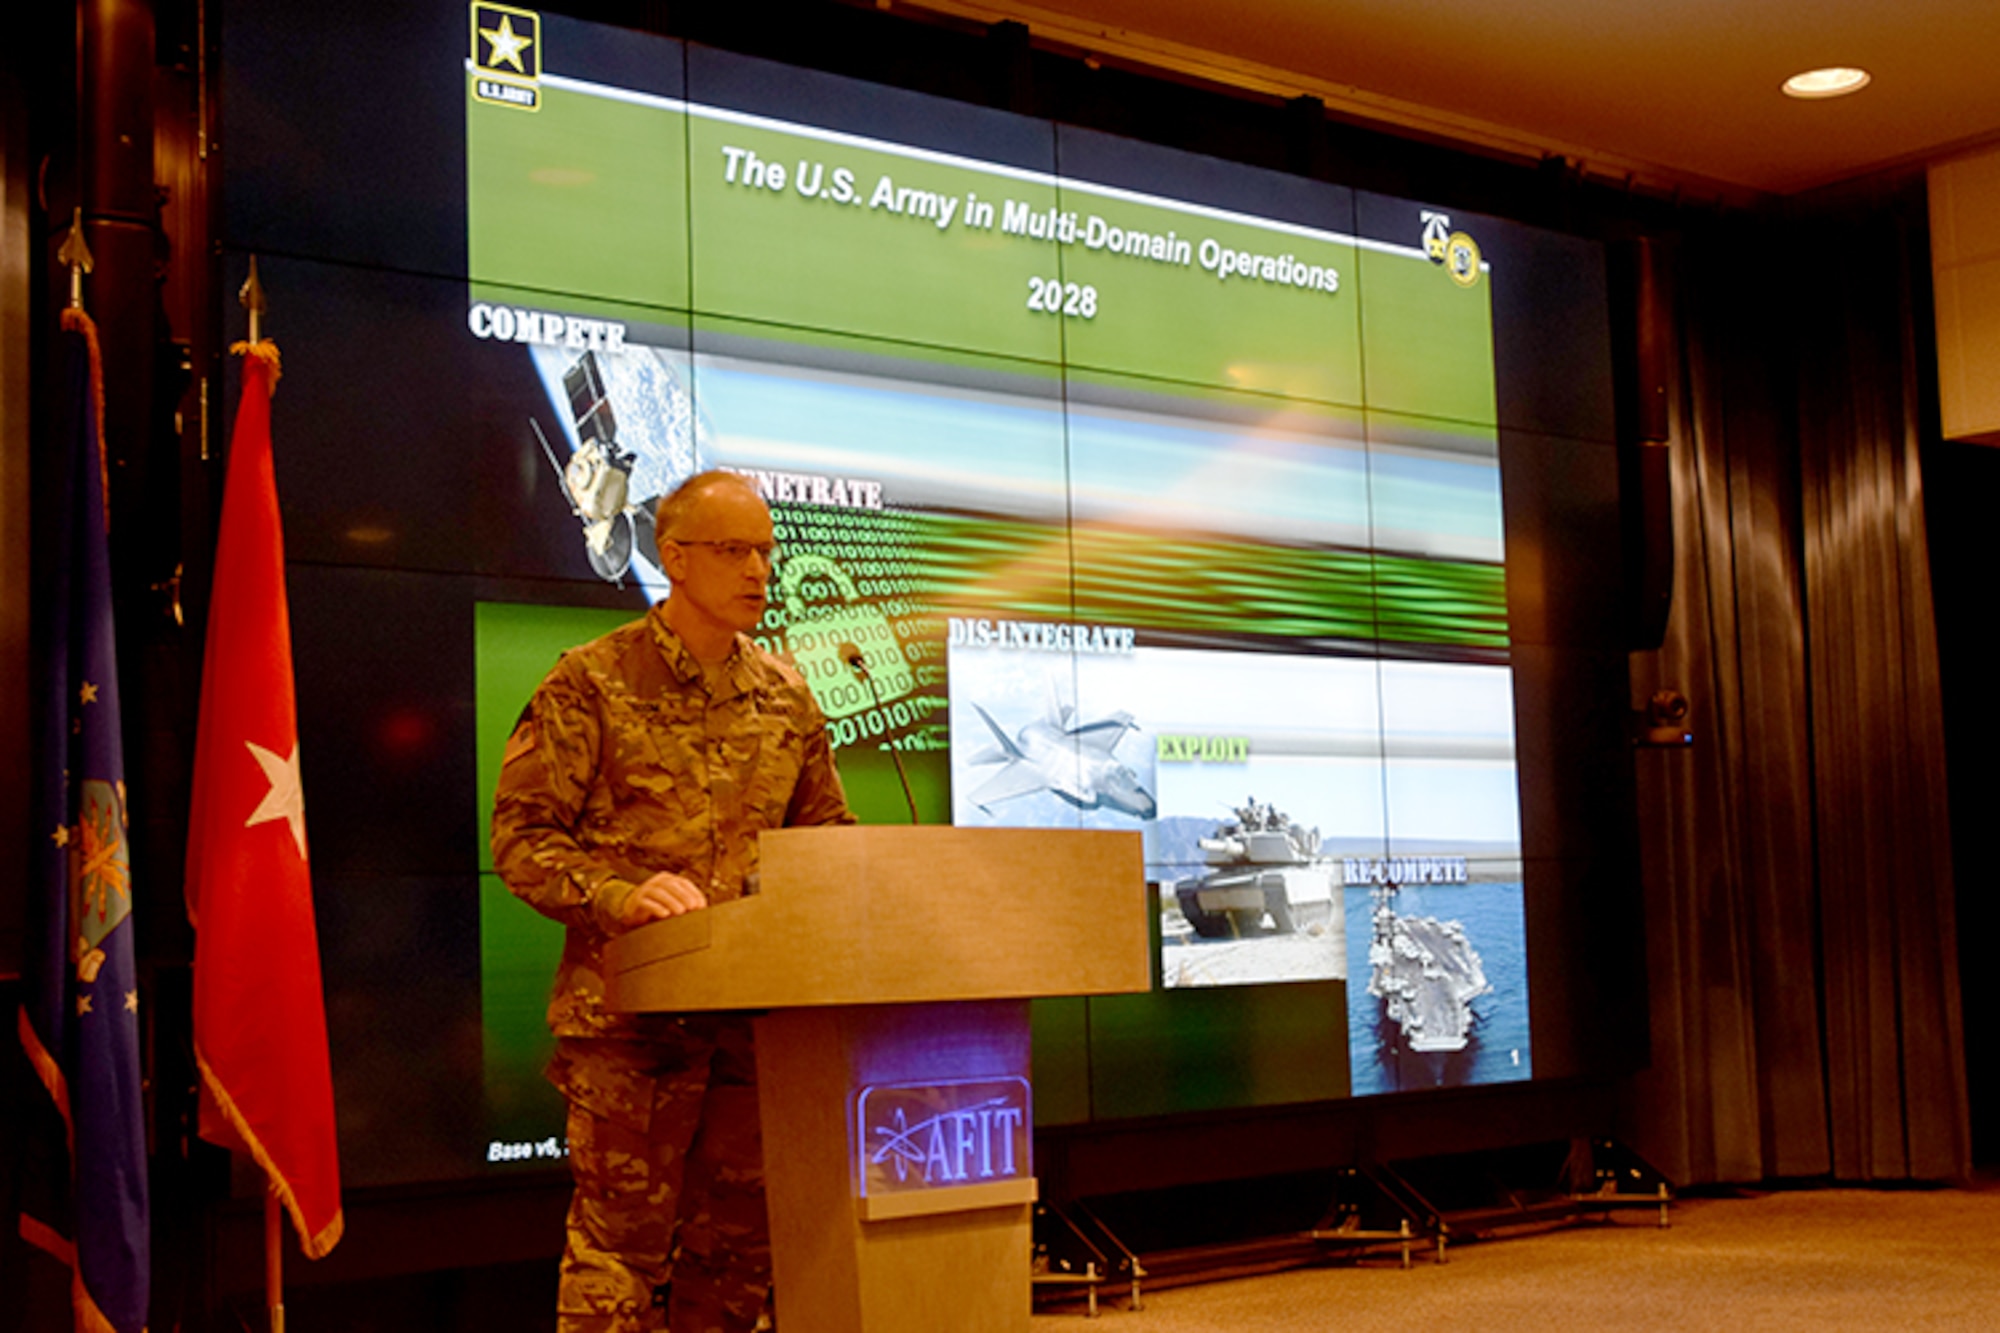 Brigadier General Mark Odom, Director of the Concepts, Futures and Concepts Center, Army Futures Command, stressed the importance of a joint operational understanding to be successful in Multi-Domain Operations. (U.S. Air Force photo/Katie Scott)